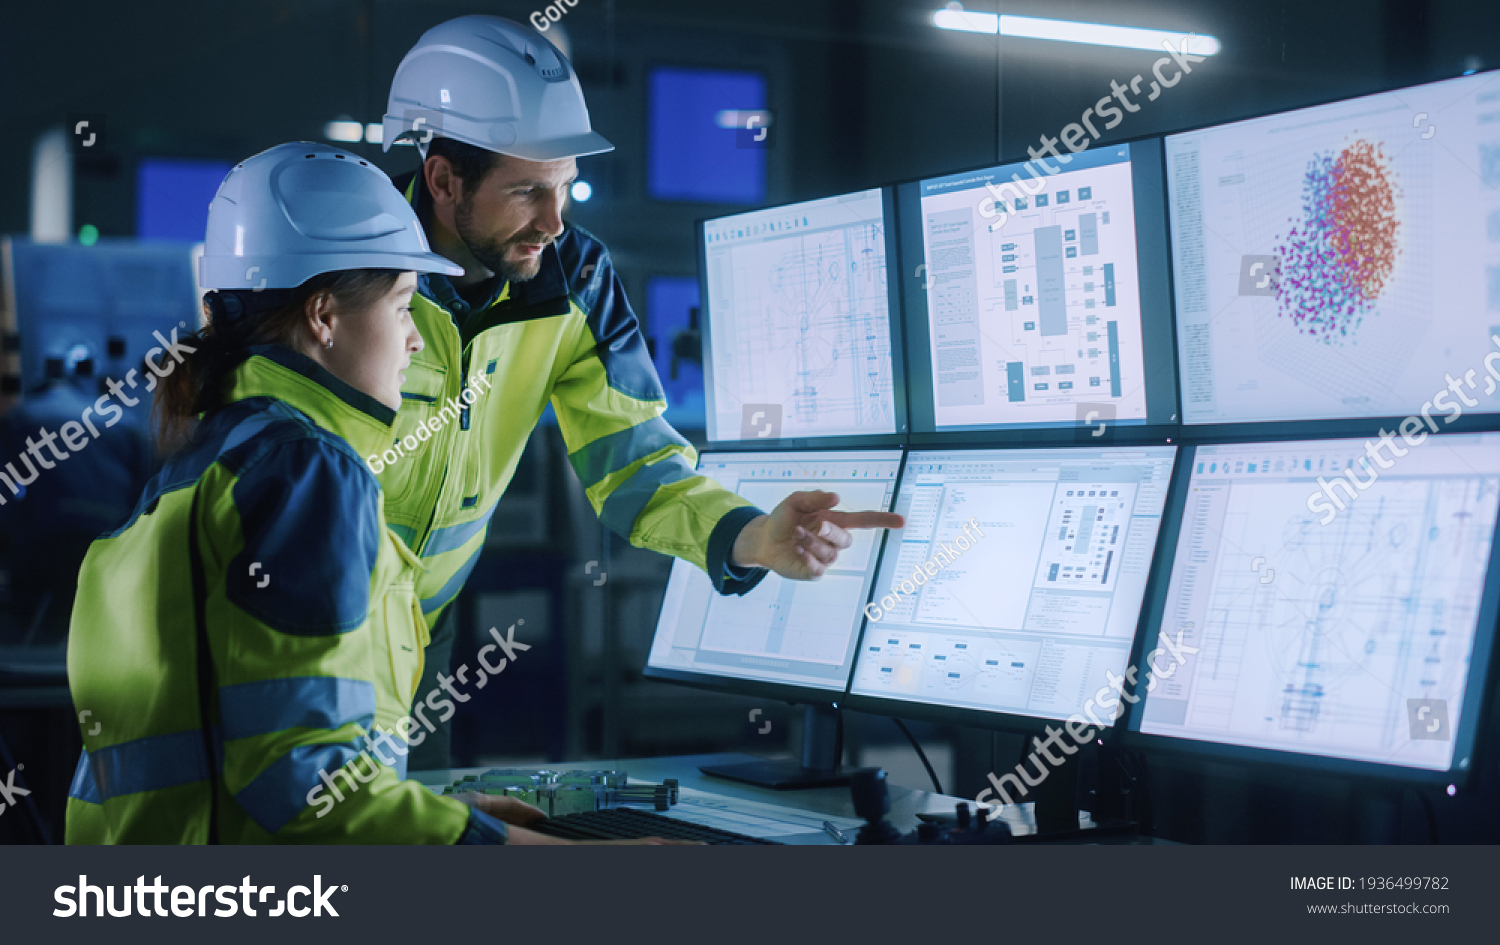 Industry 4.0 Modern Factory: Chief Project Manager Talks to Female Engineer, She Points at Computer Screens Showing Complex Industrial Electronics Design Blueprints, They Have Find Problem Solution #1936499782